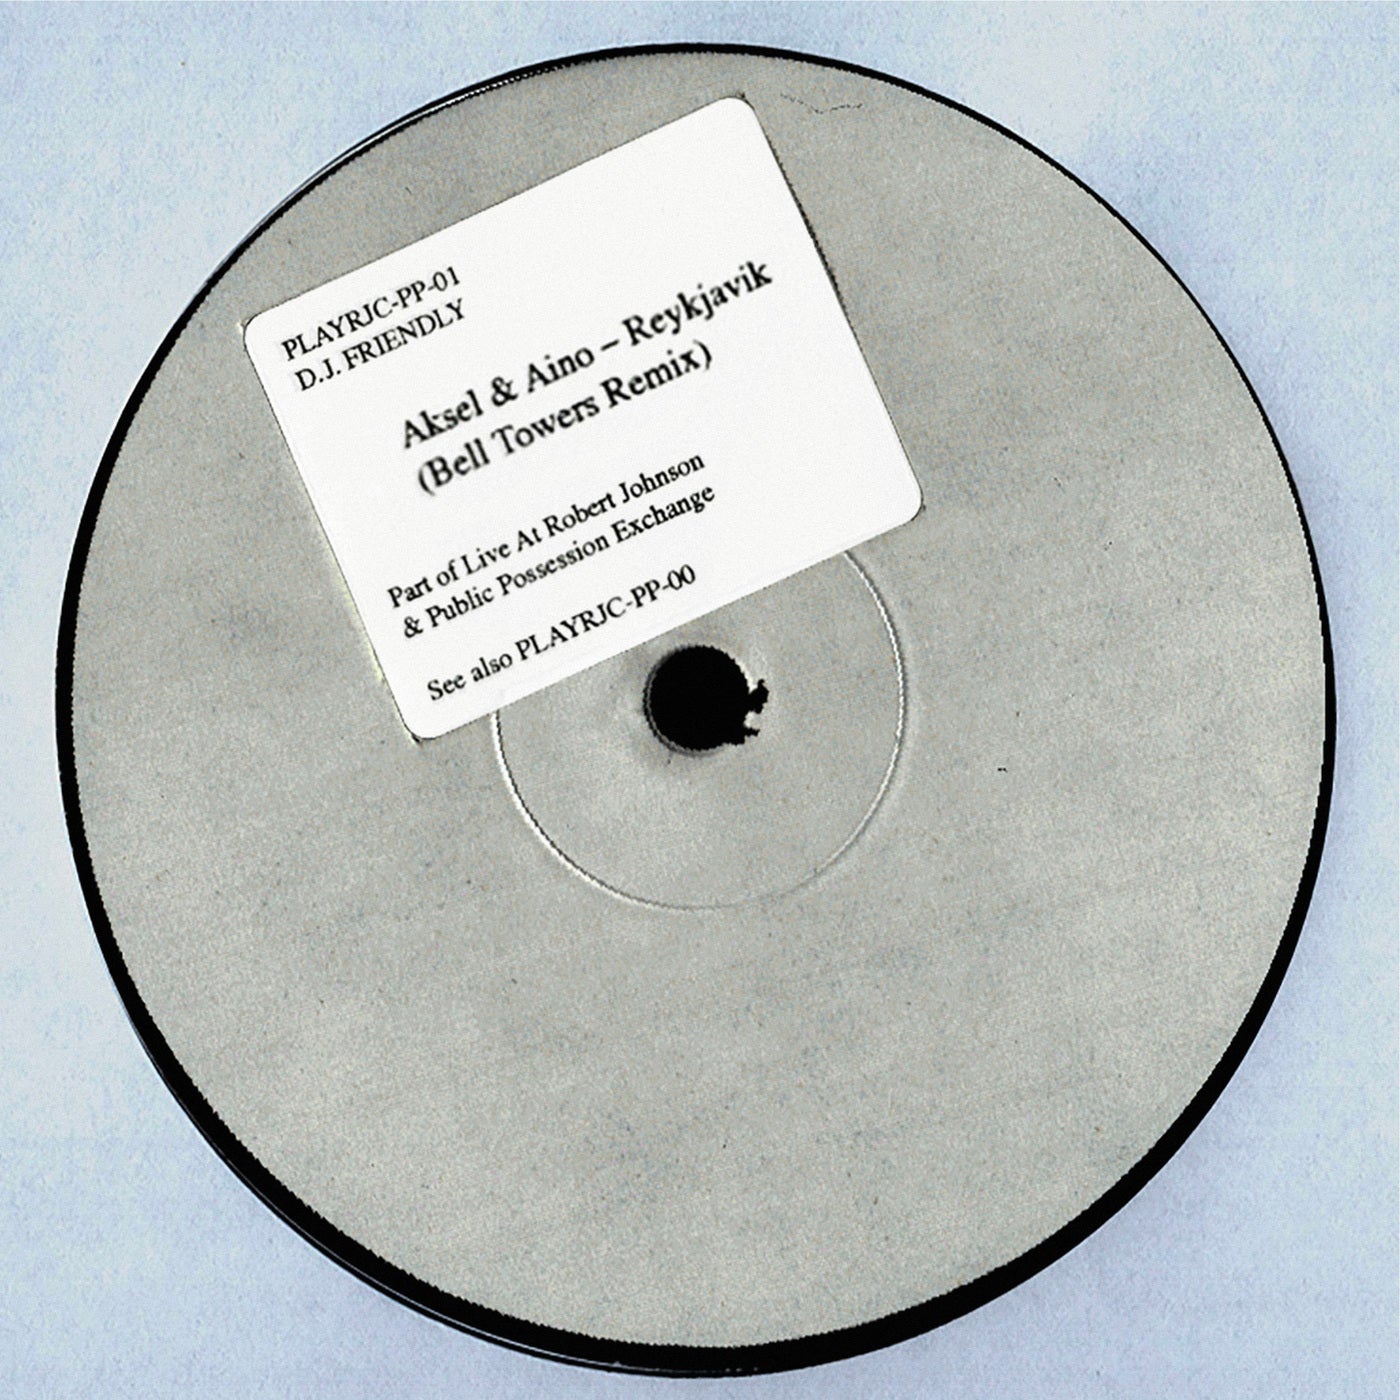 Download Reykjavik (Bell Towers Remix) on Electrobuzz